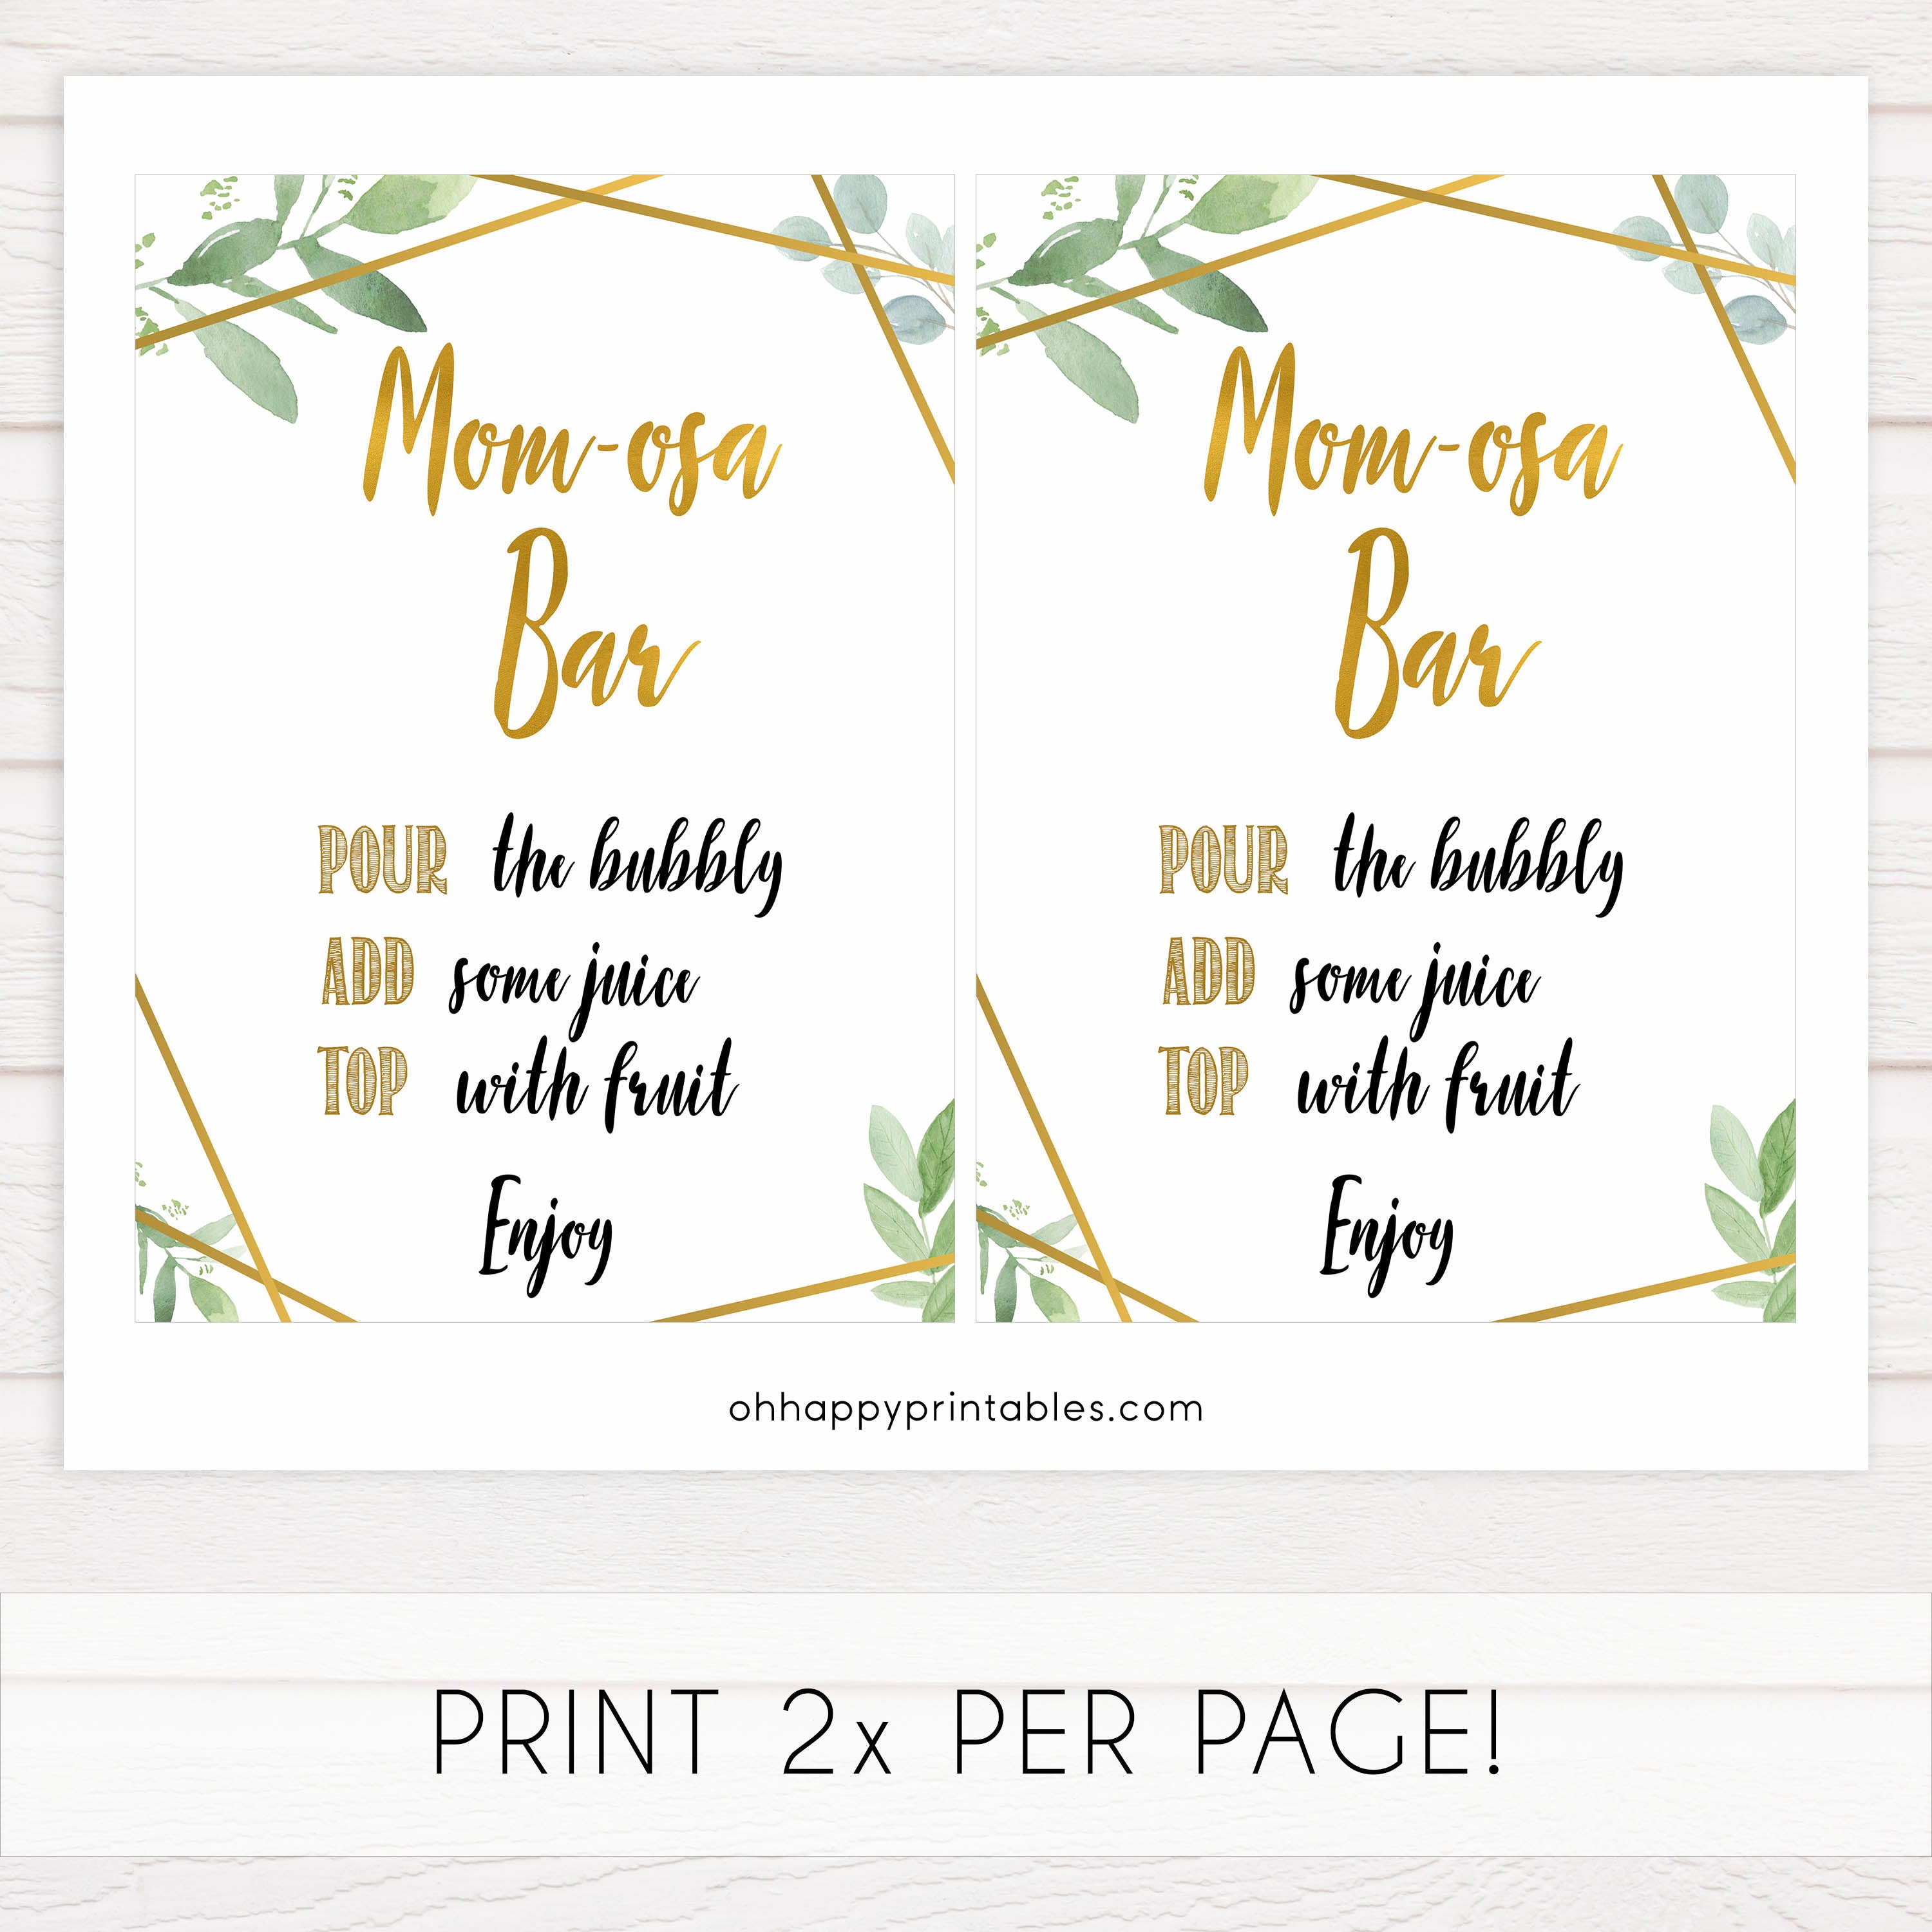 momosa baby table signs, momosa baby signs, Gold geometric baby decor, printable baby table signs, printable baby decor, gold table signs, fun baby signs, geometric fun baby table signs